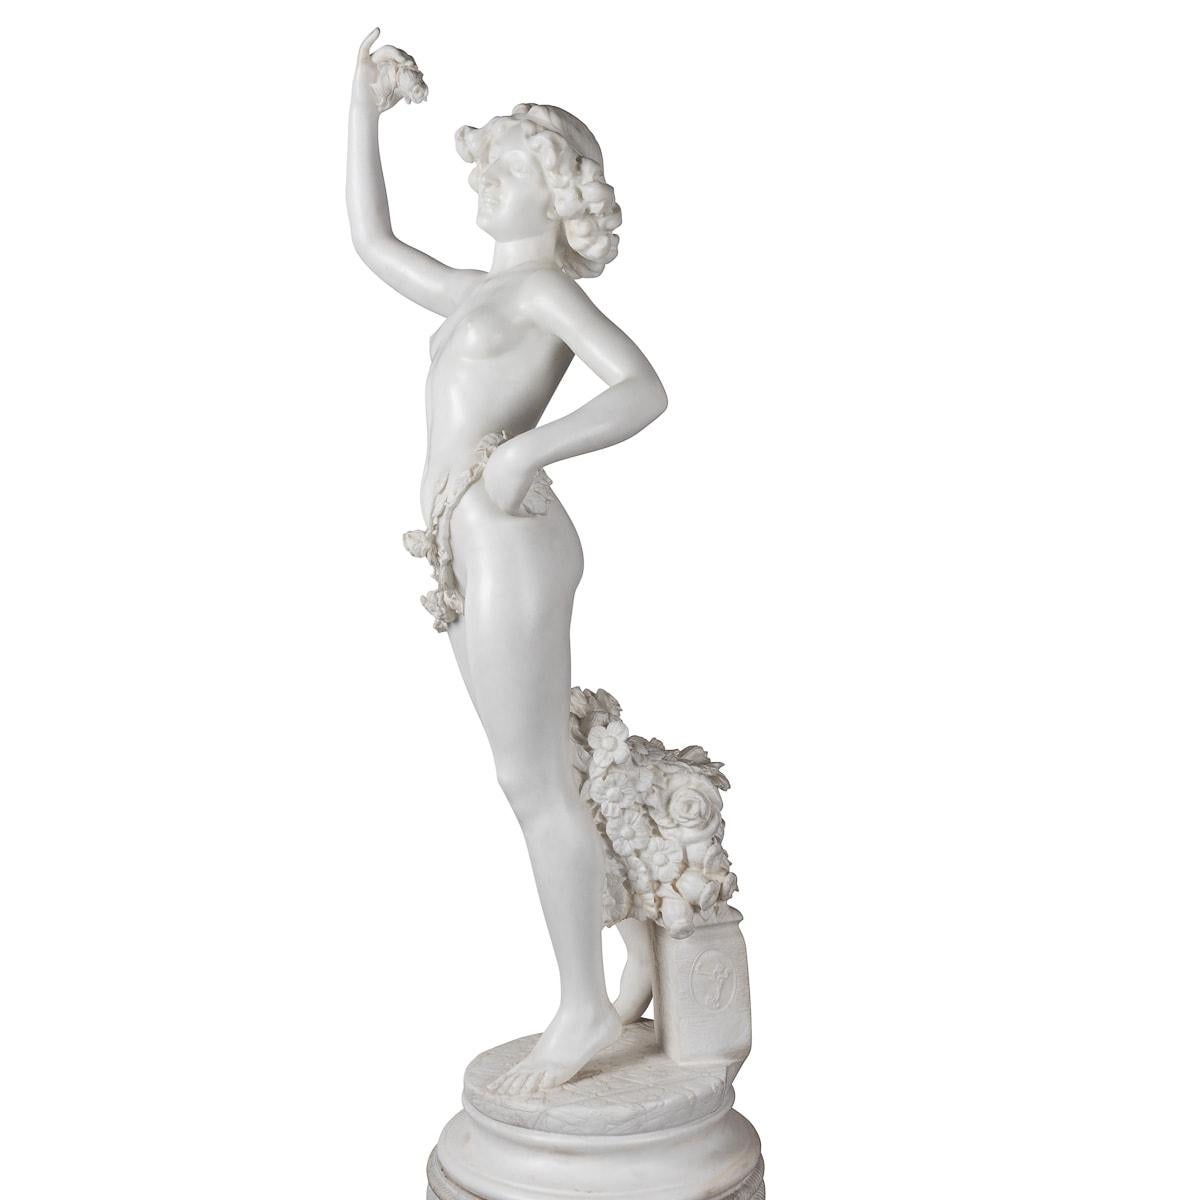 Other 19th Century Italian Marble Figure Of A Nude, Adolfo Cipriani (1880-1930) For Sale